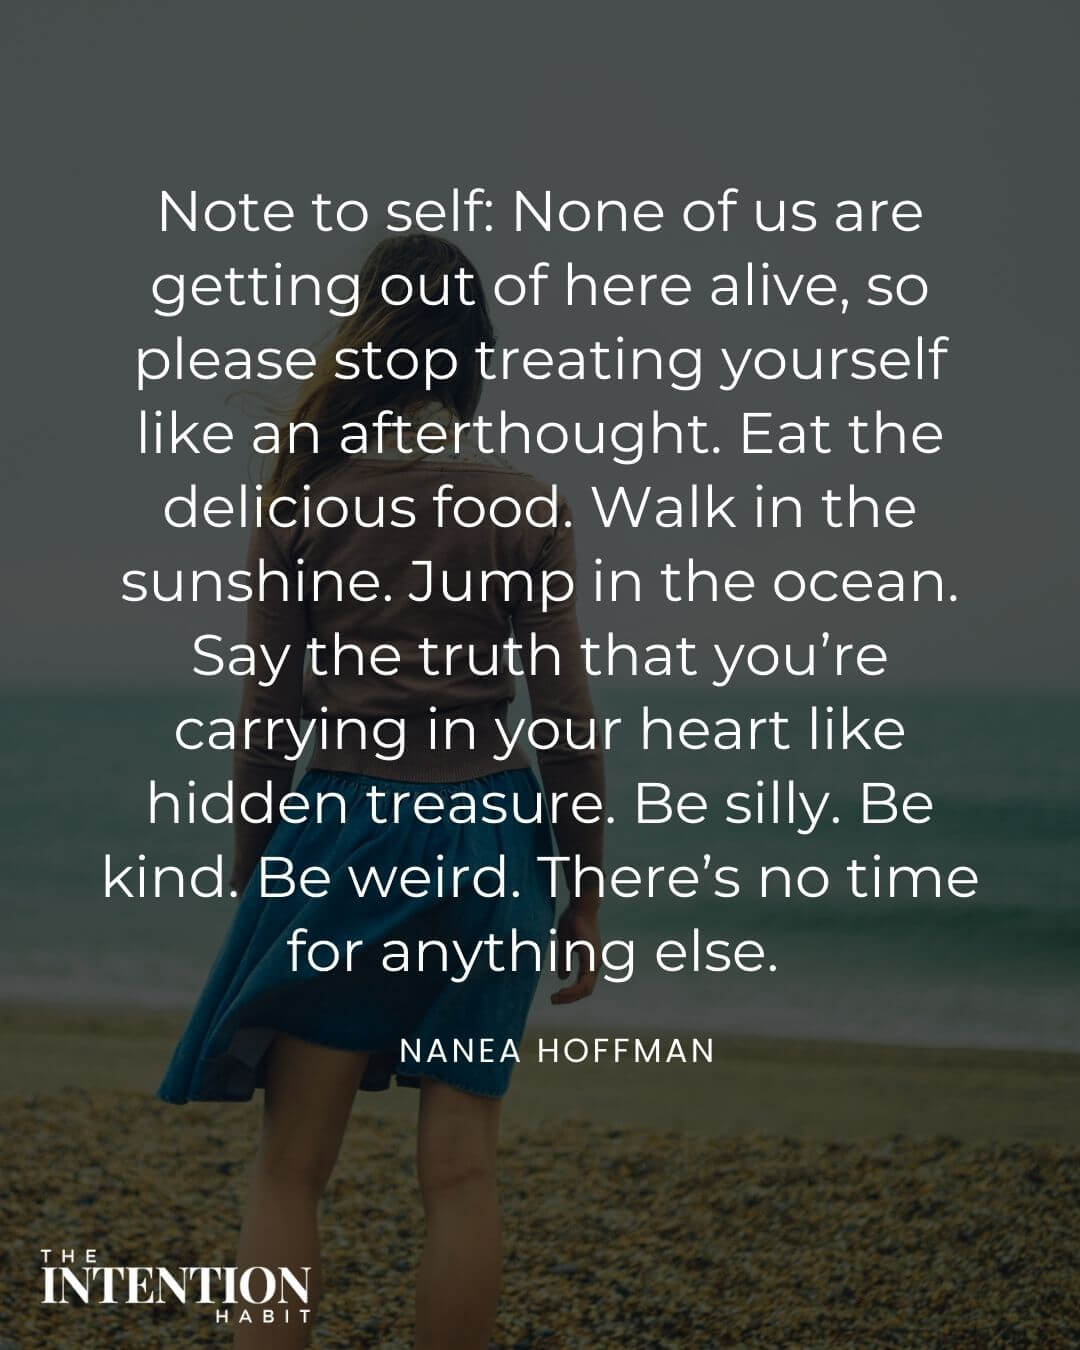 Intentional living quote - note to self: none of us are getting out of here alive so please stop treating yourself like an afterthought, eat the delicious food. Walk in the sunshine. Jump in the ocean. Say the truth that you're carrying in your heart like hidden treasure. be silly. Be kind. be weird. there's no time for anything else